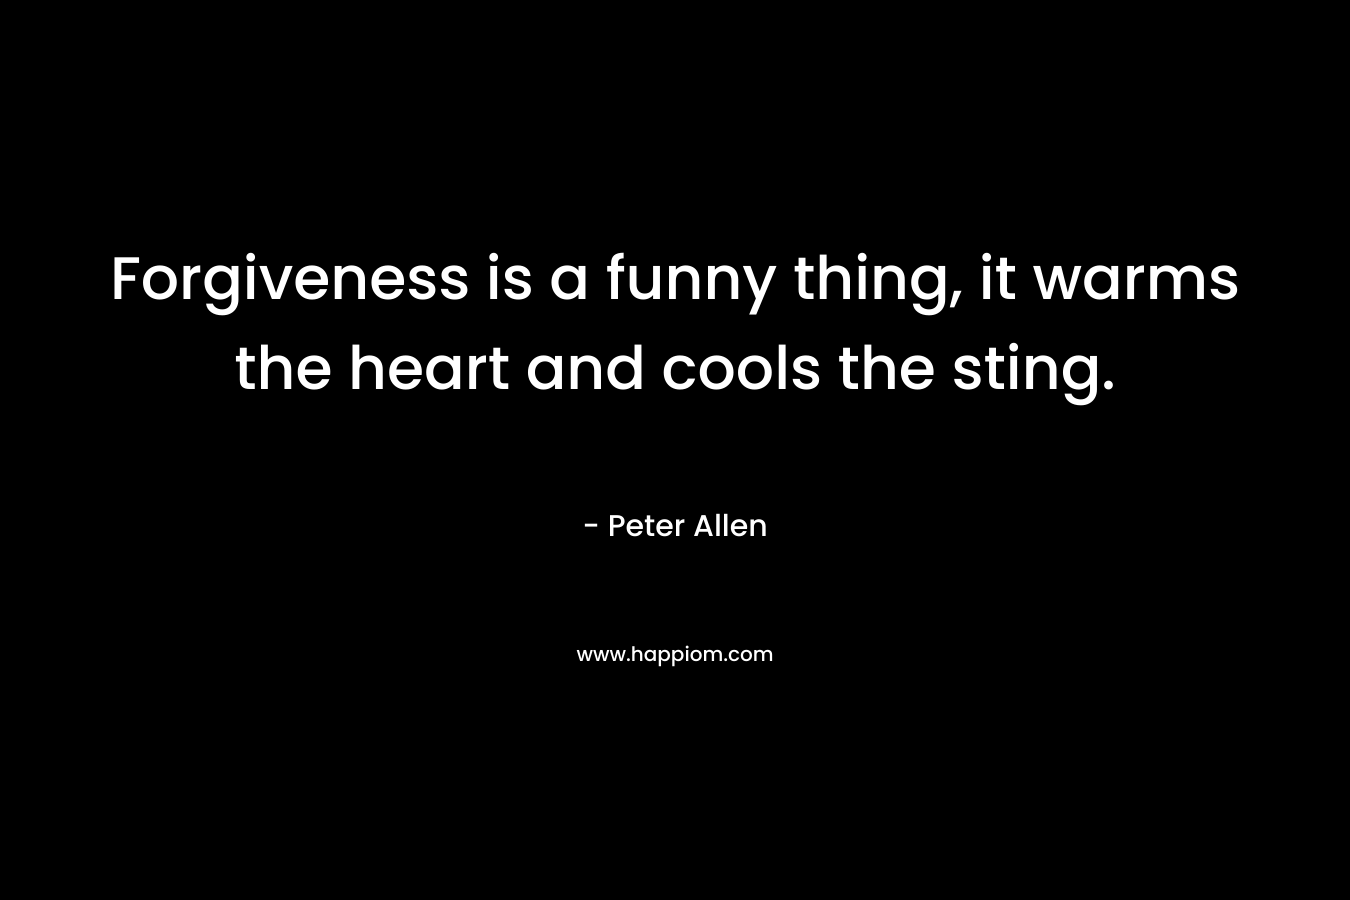 Forgiveness is a funny thing, it warms the heart and cools the sting. – Peter Allen